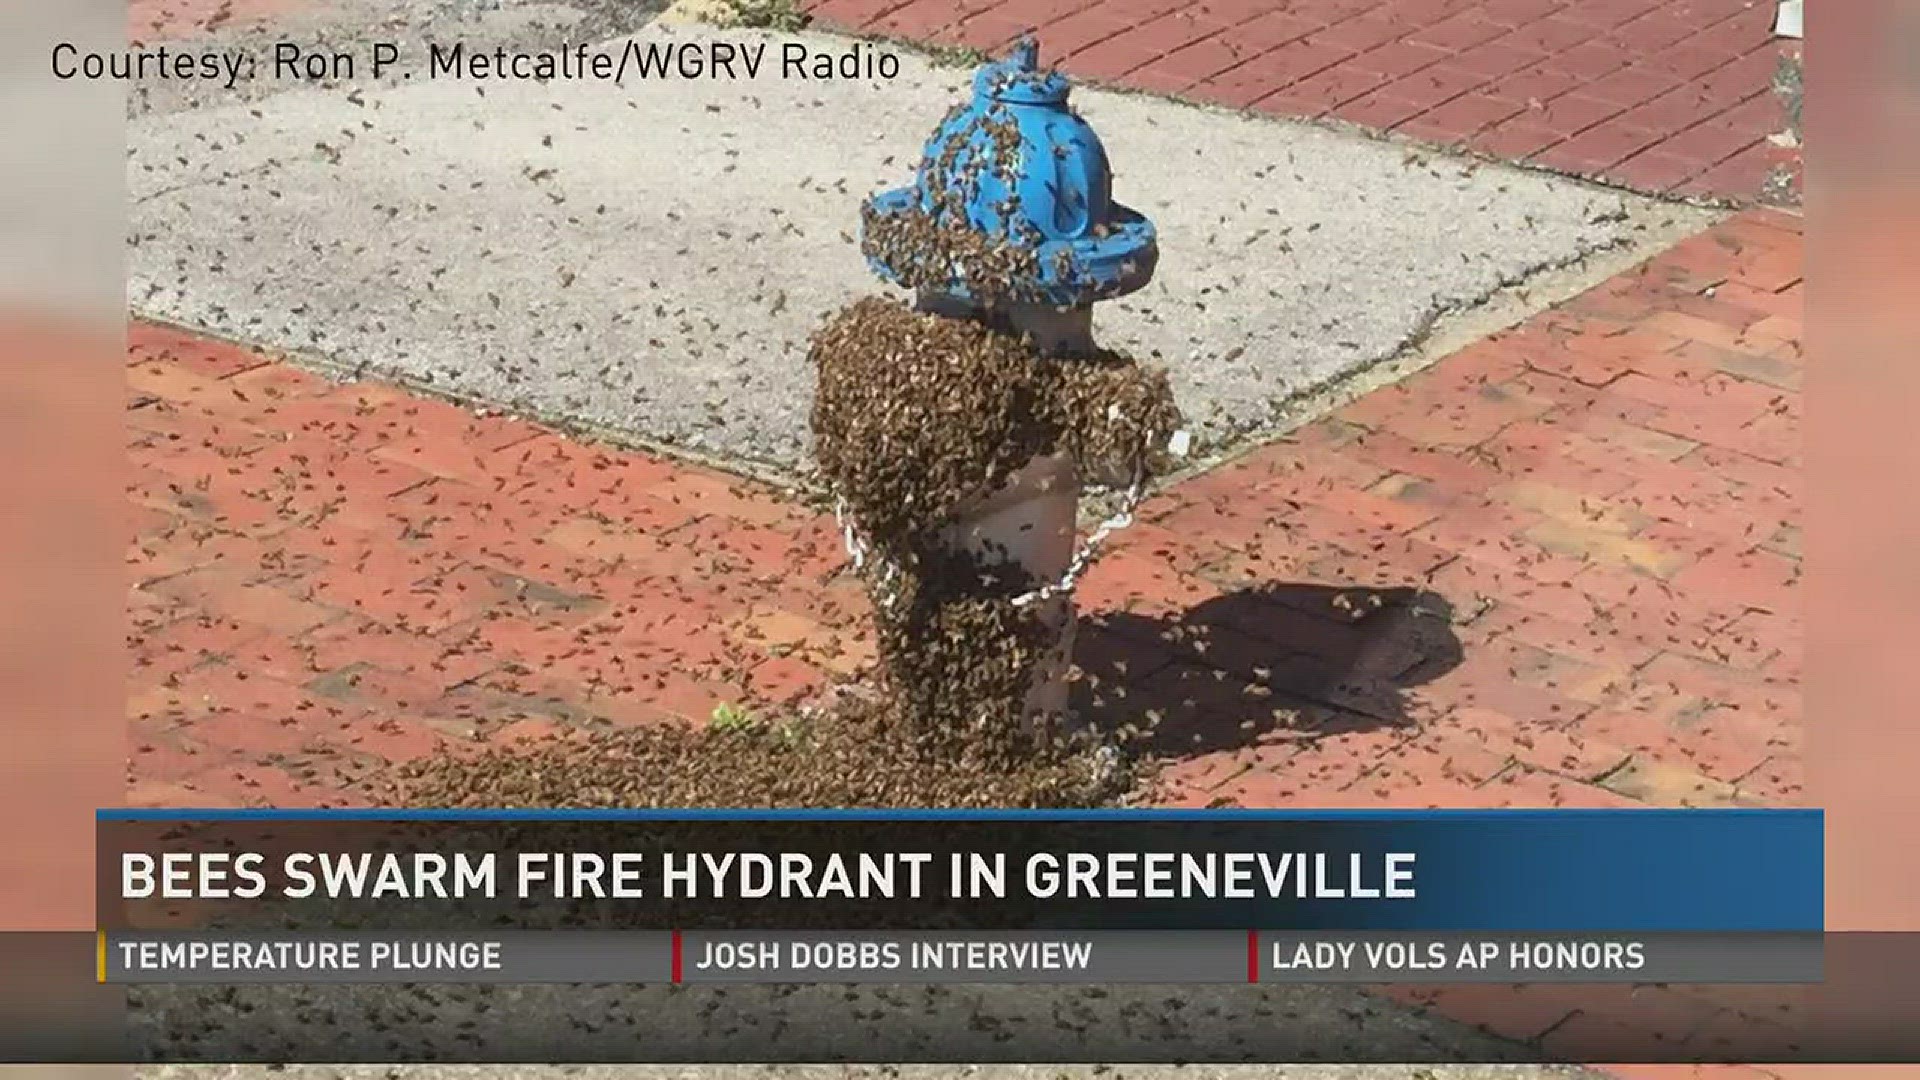 March 8, 2017: A local beekeeper stepped in to help after thousands of bees swarmed a fire hydrant in downtown Greeneville.